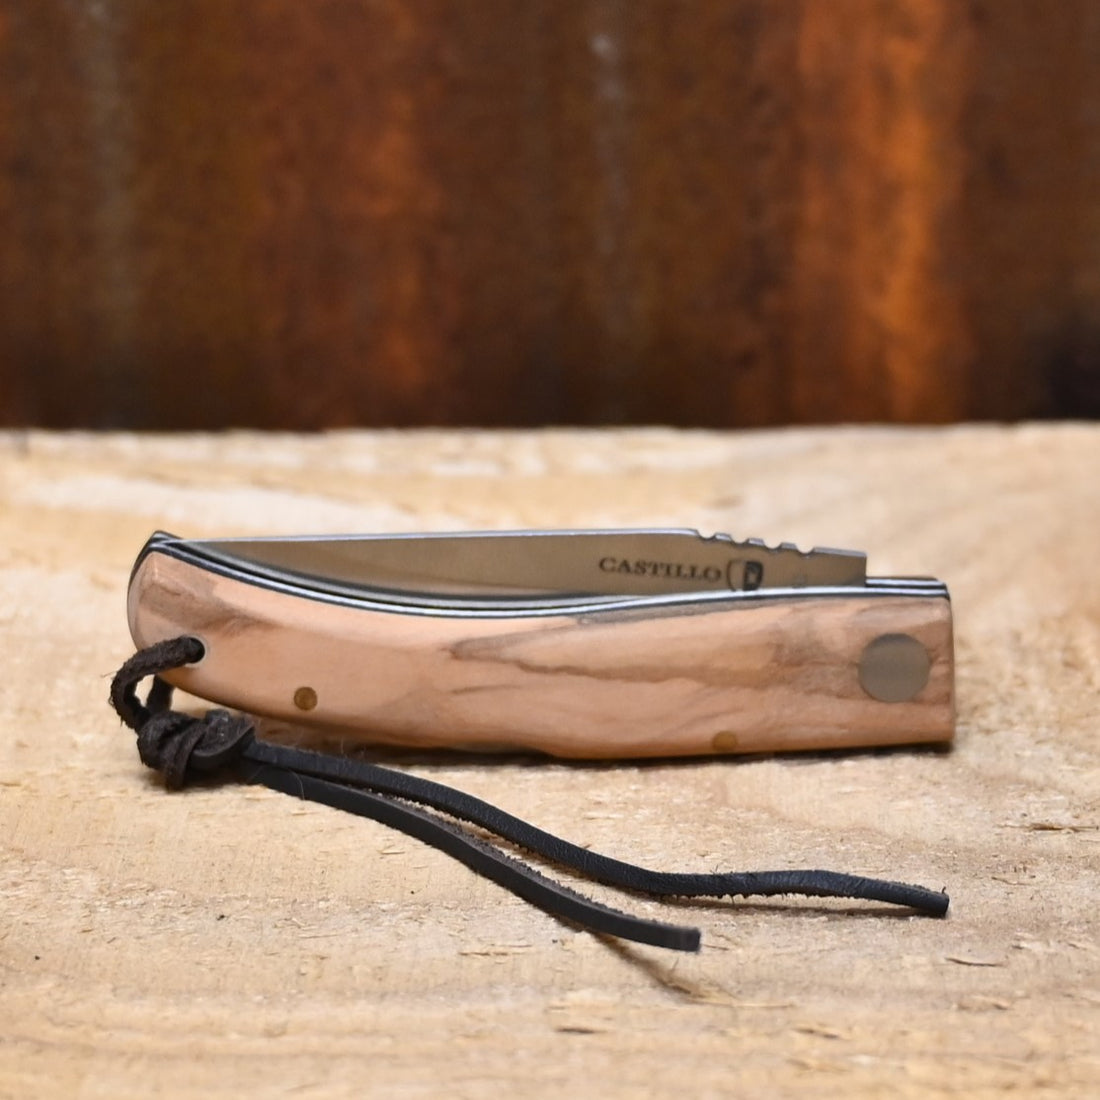 Castillo Tagus Olive Wood Folding Knife view of knife